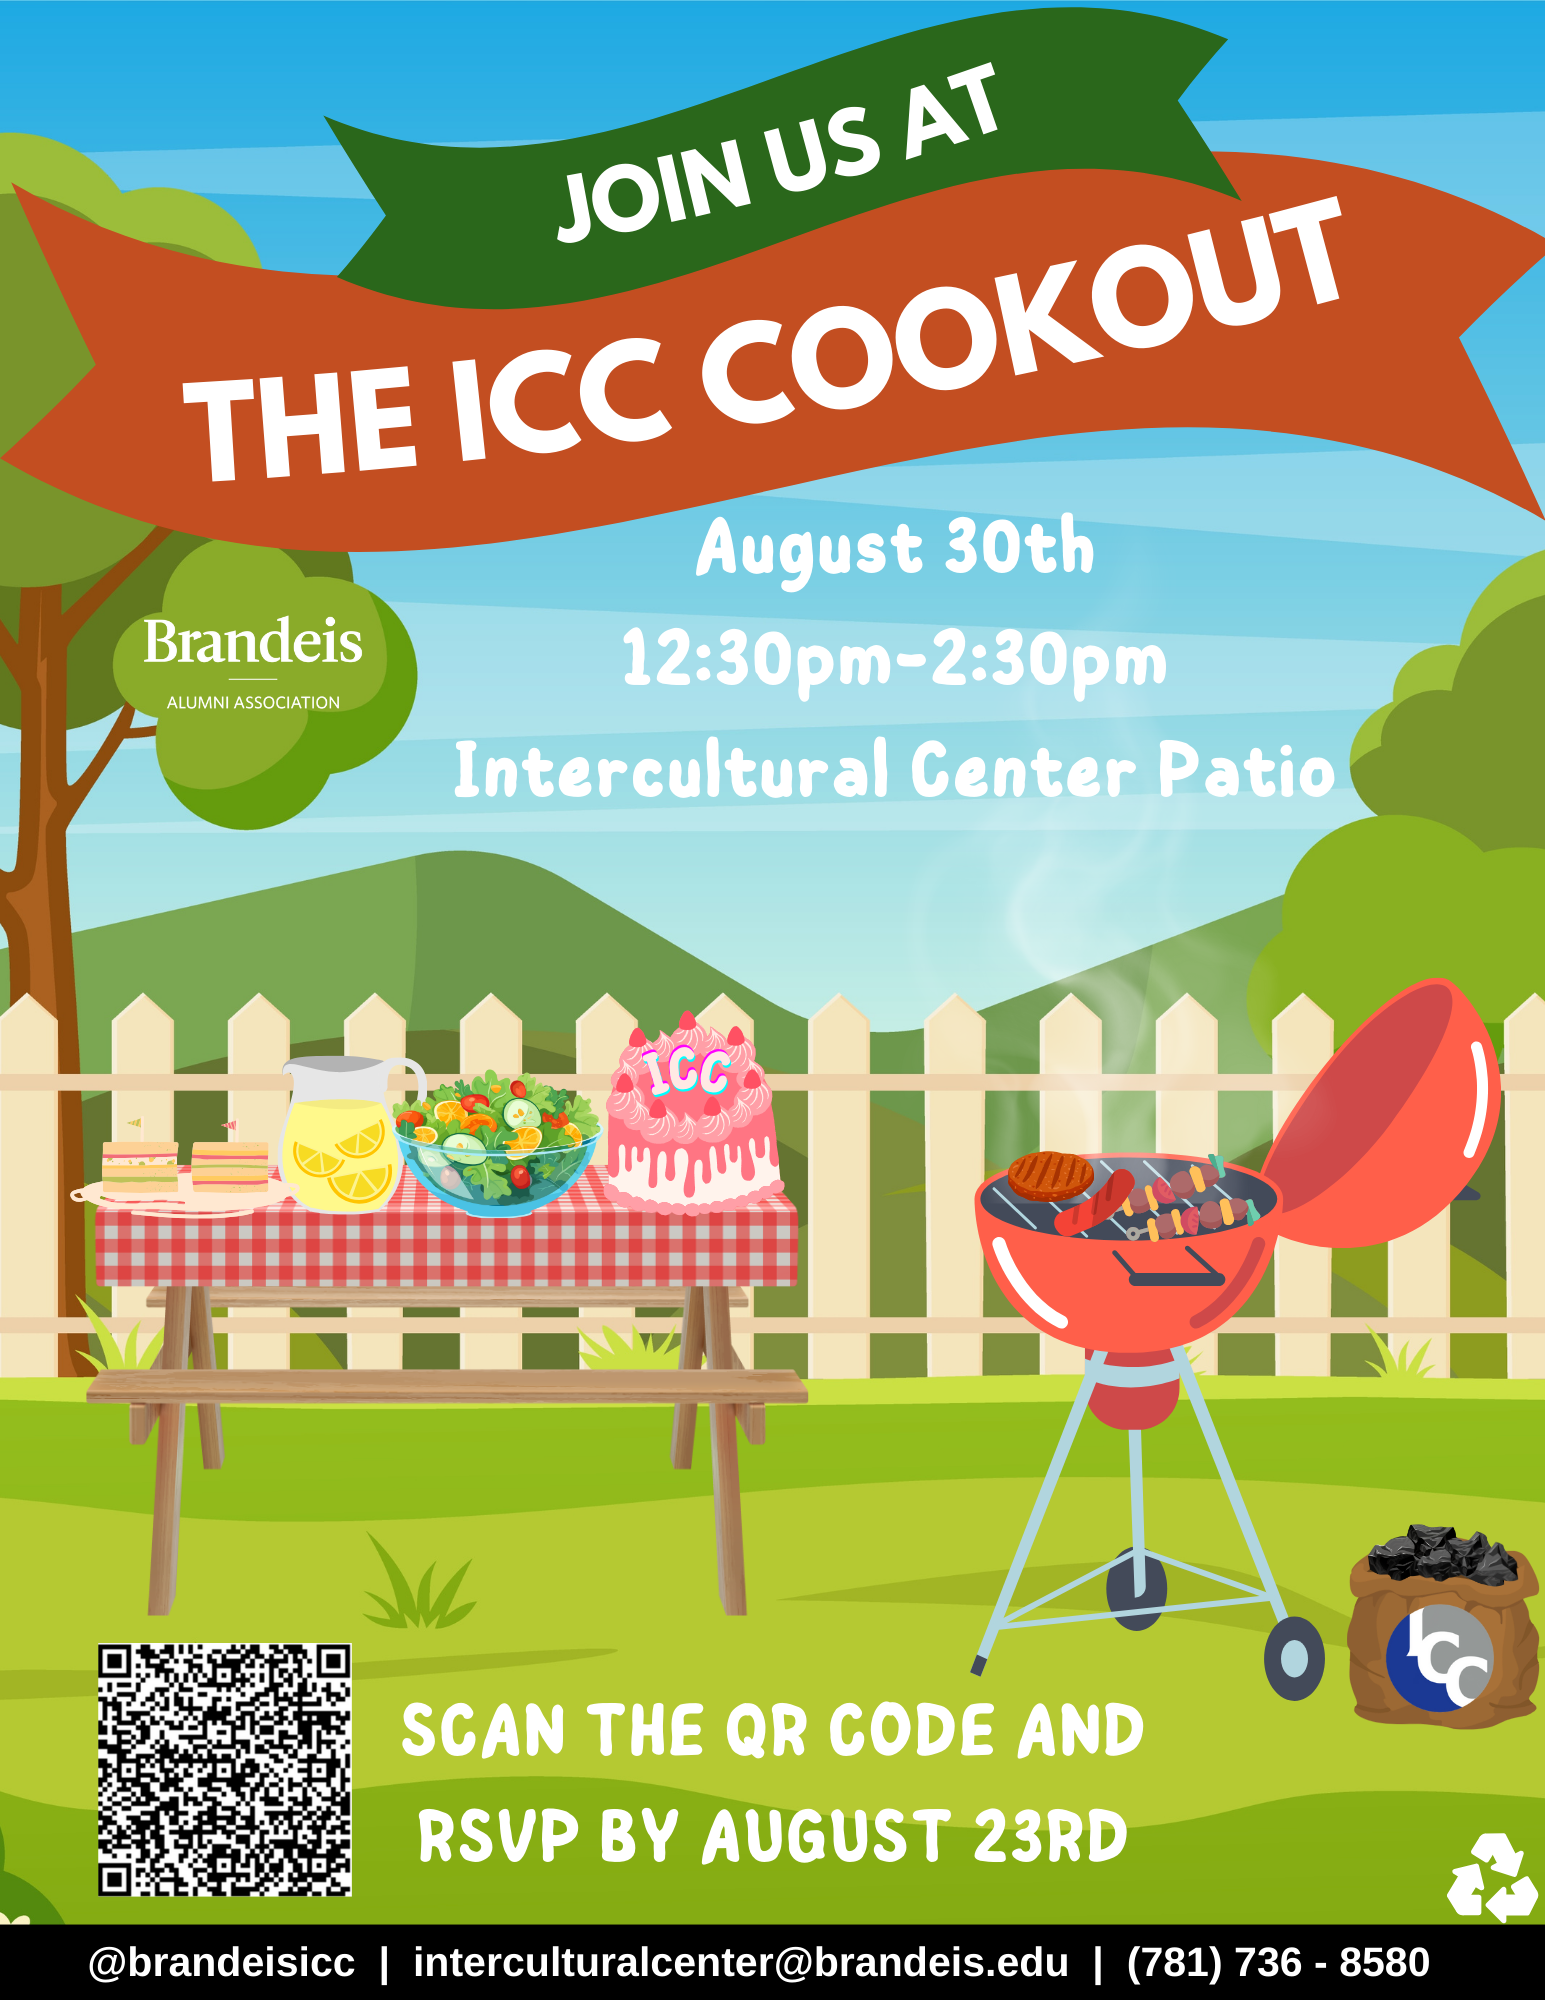 Let's Get together for the ICC Cookout. Friday, September 1 from 12:30 p.m. - 2:30 p.m. Intercultural Center Patio (Across from East Quad)